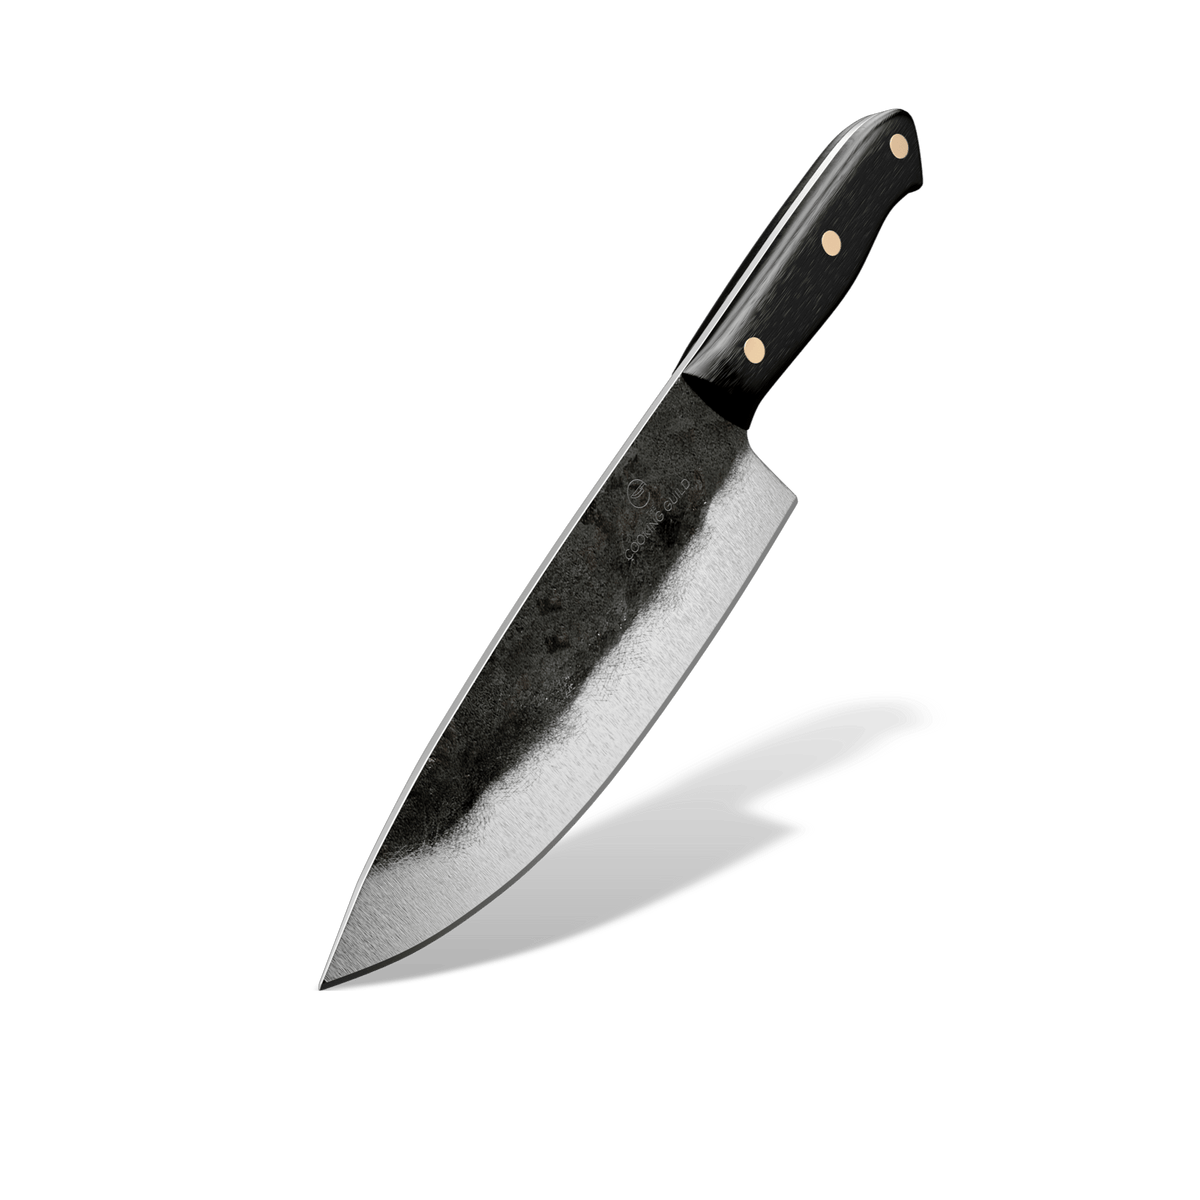 Hand Forged 8" Chef's Knife - TheCookingGuild